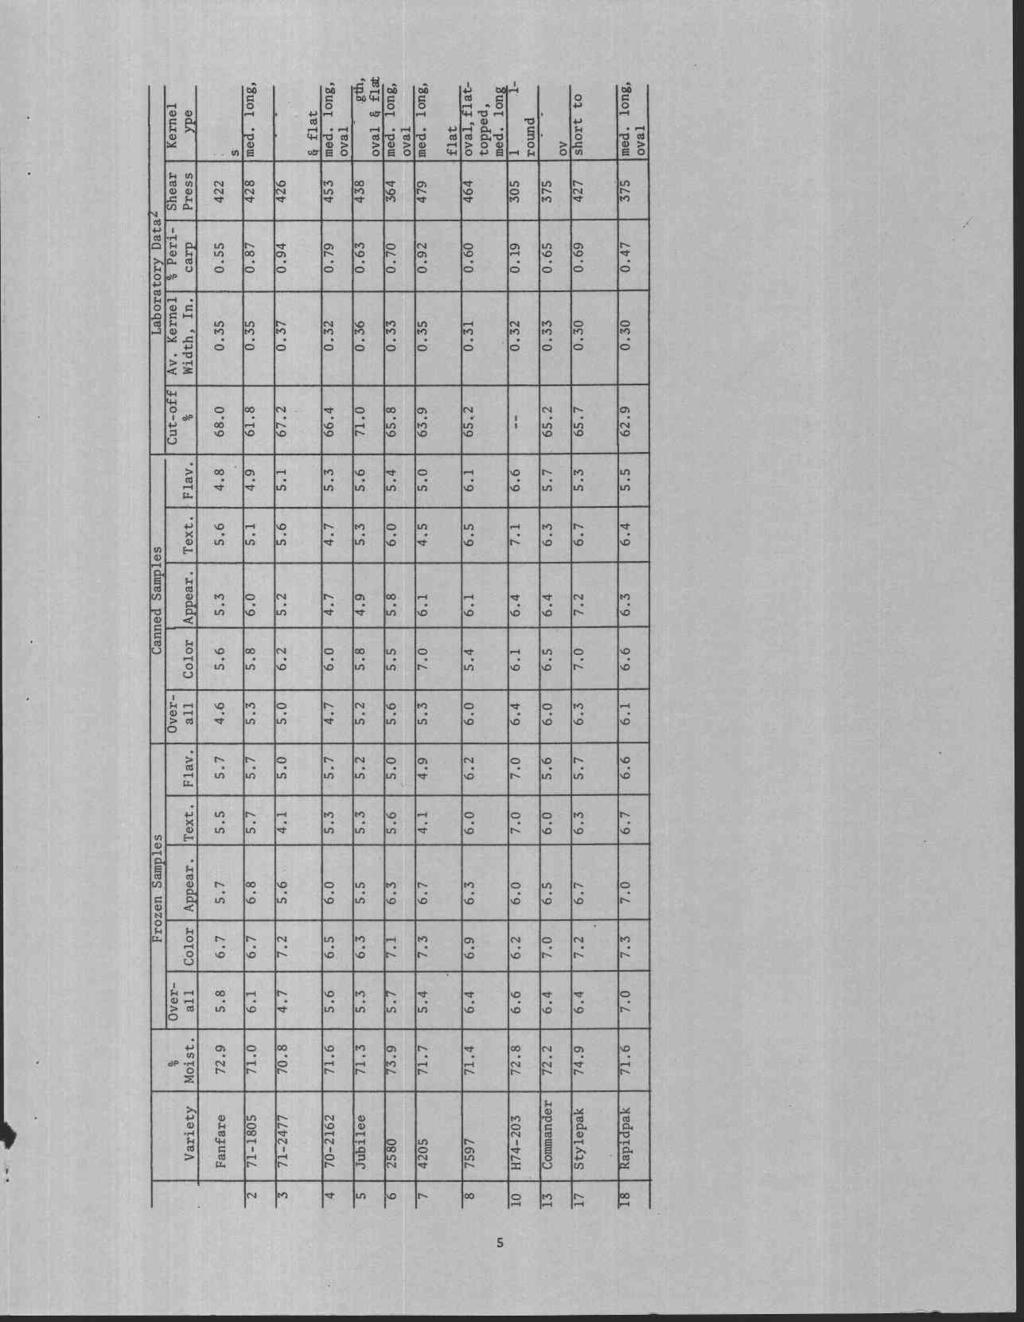 Table 3. Panel Quality Evaluations of Processed Sweet Corn Varieties, Corvallis, Oregon, 19751 No. Variety % Moist, Frozen Sanp1es Canned Samples Laboratory Data2 Overall Cut-off Av.